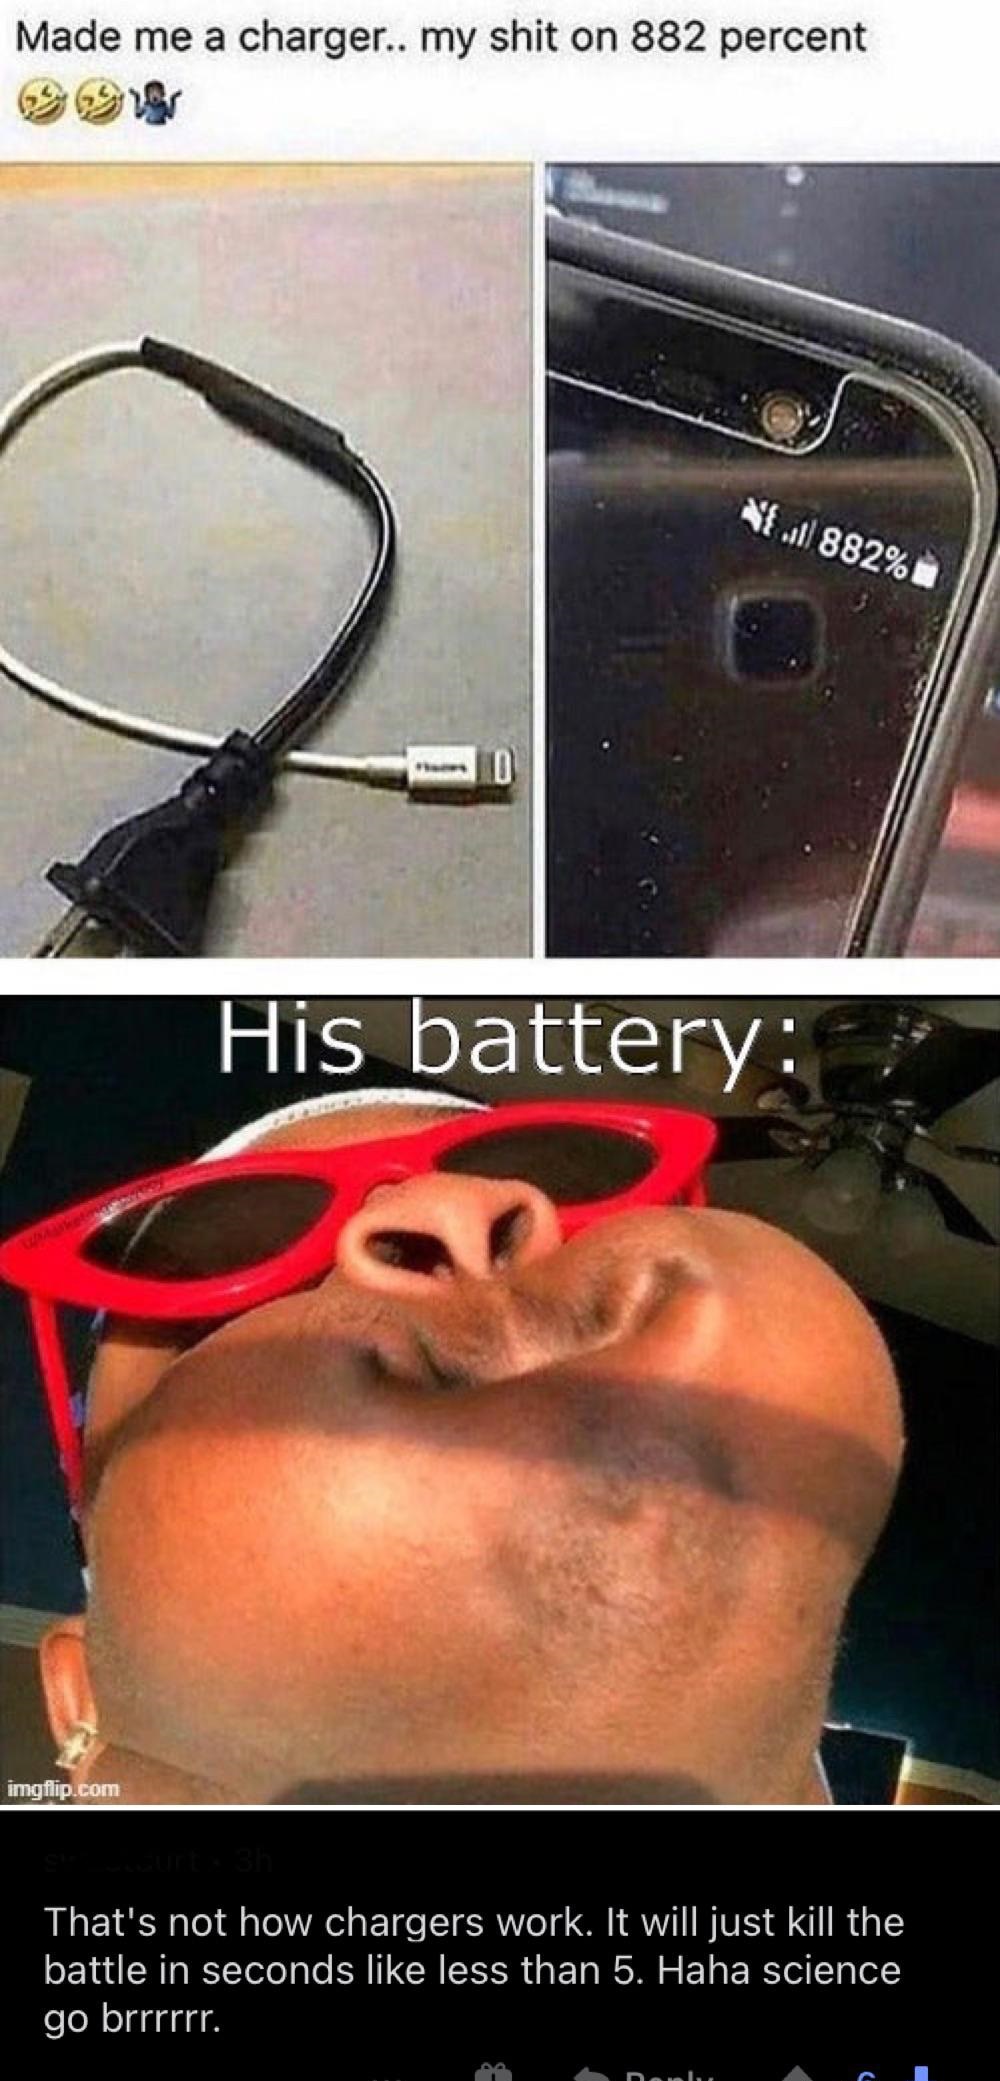 clever jokes - you hit your pinky toe - Made me a charger.. my shit on 882 percent { .ll 882% D His battery imgflip.com That's not how chargers work. It will just kill the battle in seconds less than 5. Haha science go brrrrrr. Di